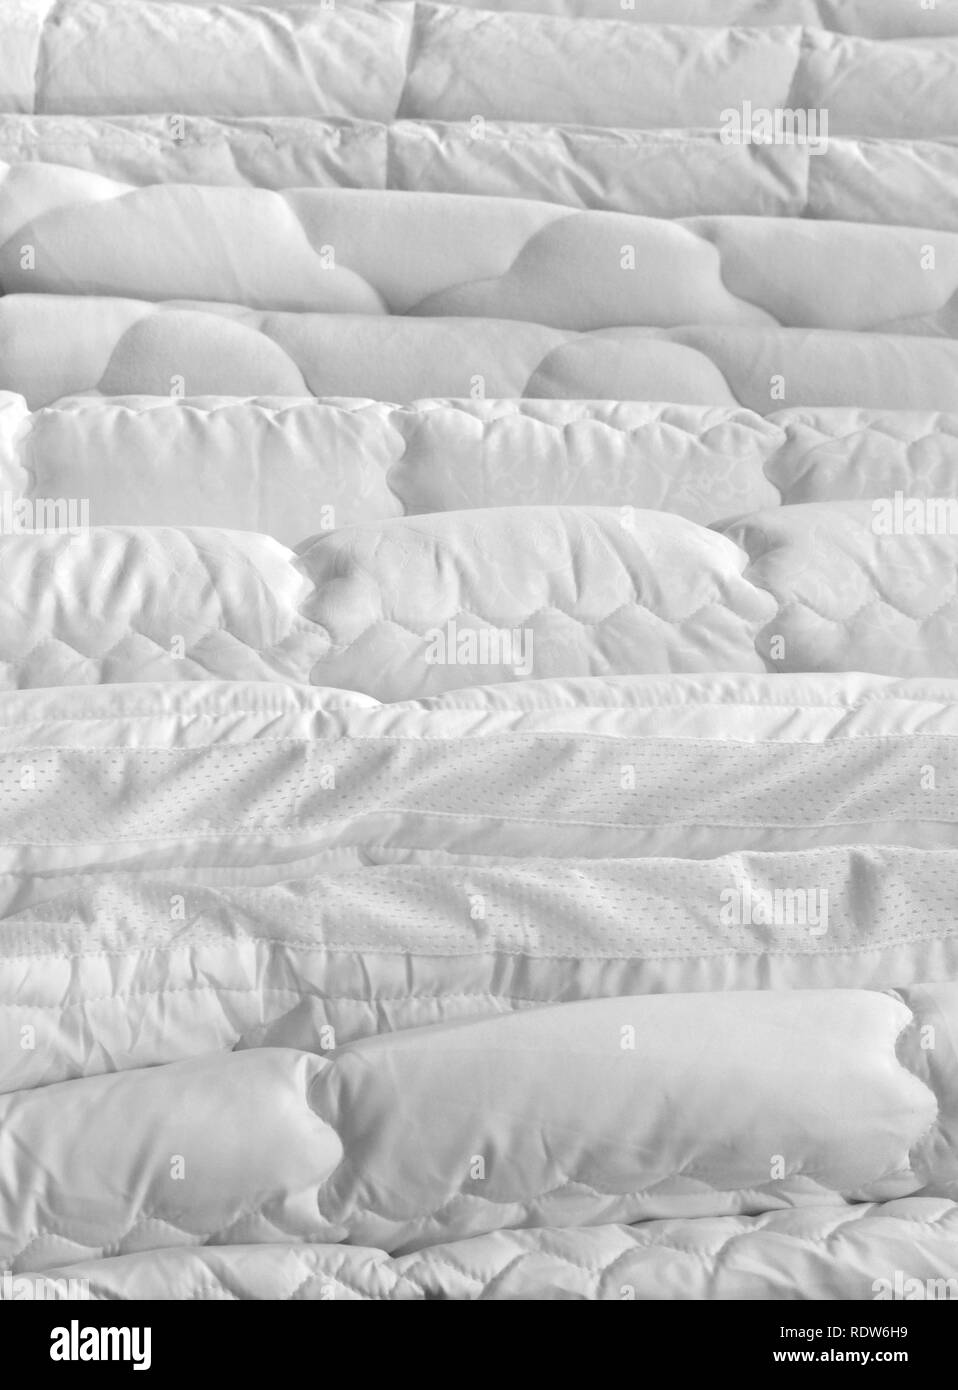 A stack of white new clean duvets in store Stock Photo